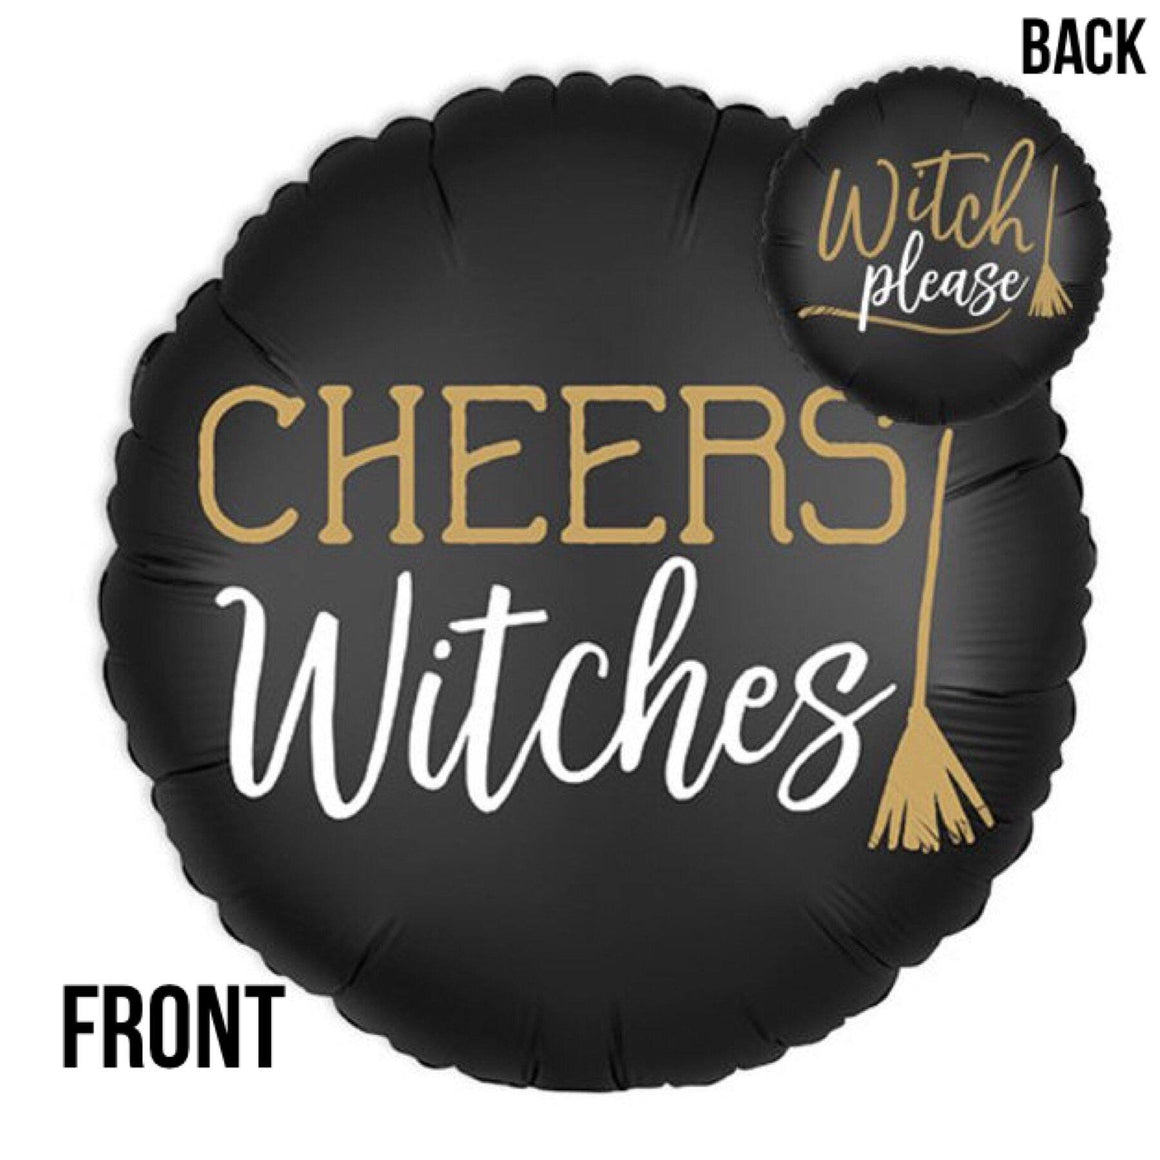 BALLOONS - WITCH PLEASE / CHEERS WITCHES, Balloons, Anagram - Bon + Co. Party Studio